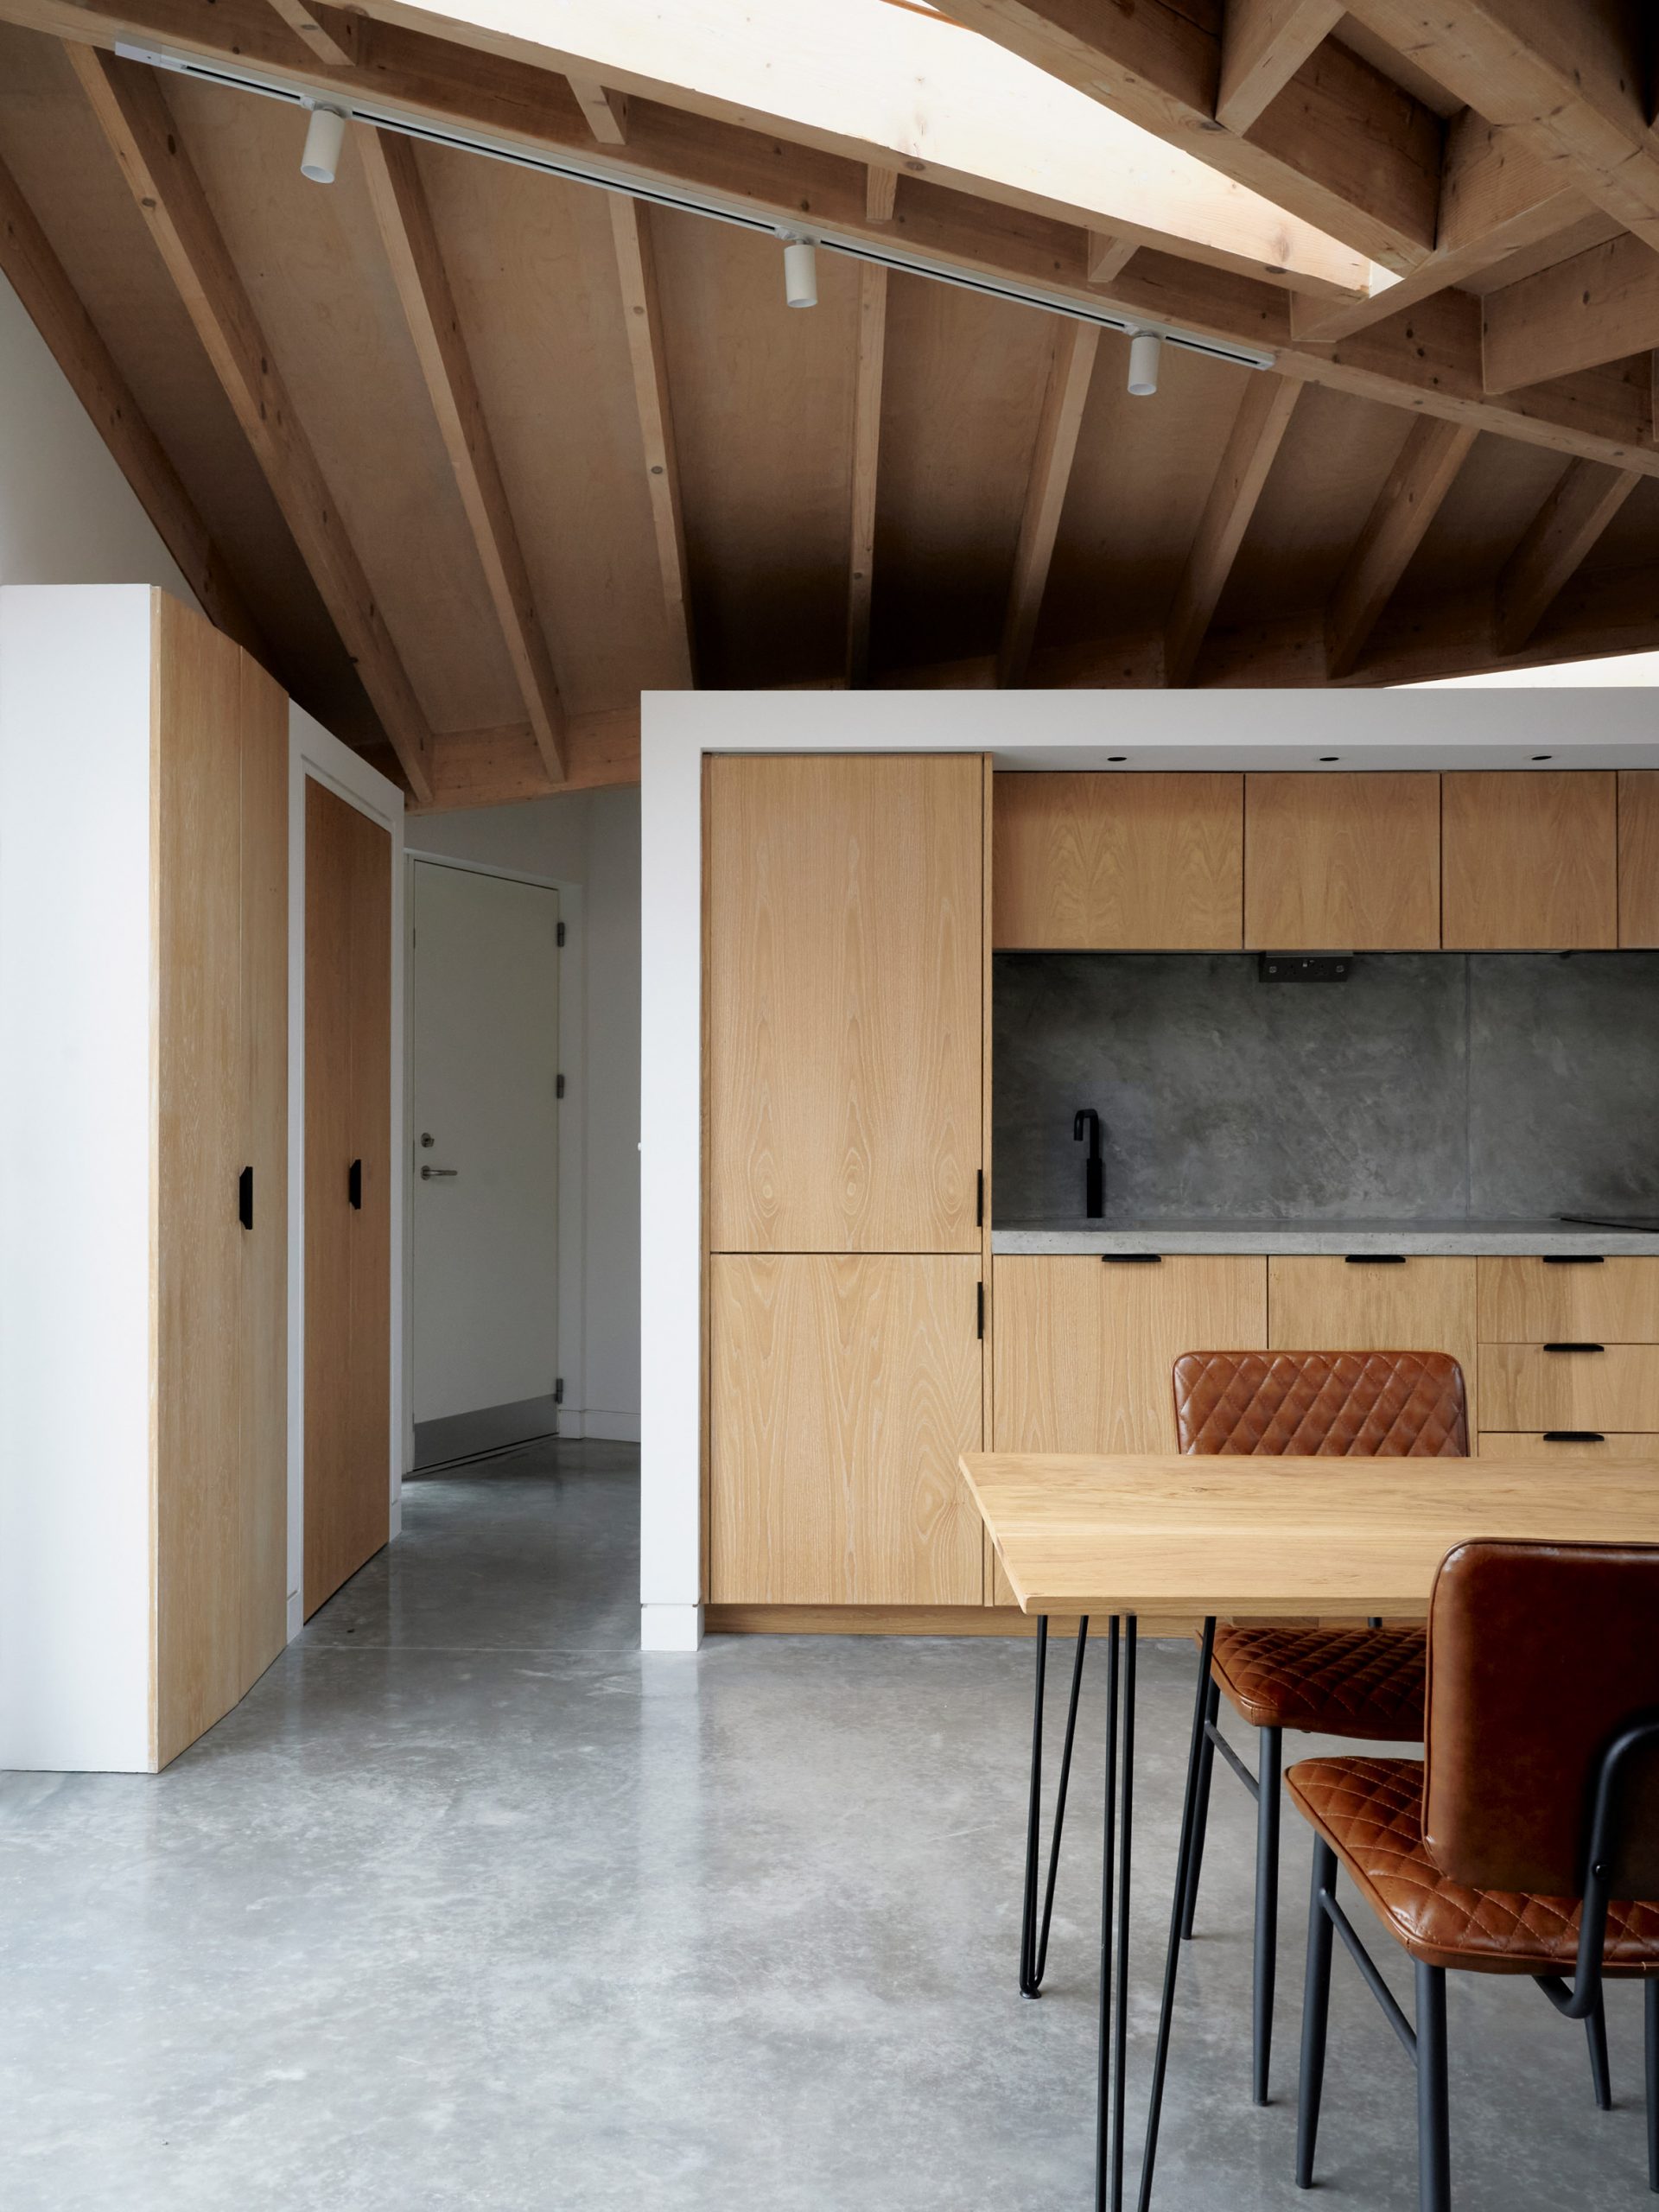 A kitchen with an exposed timber roof